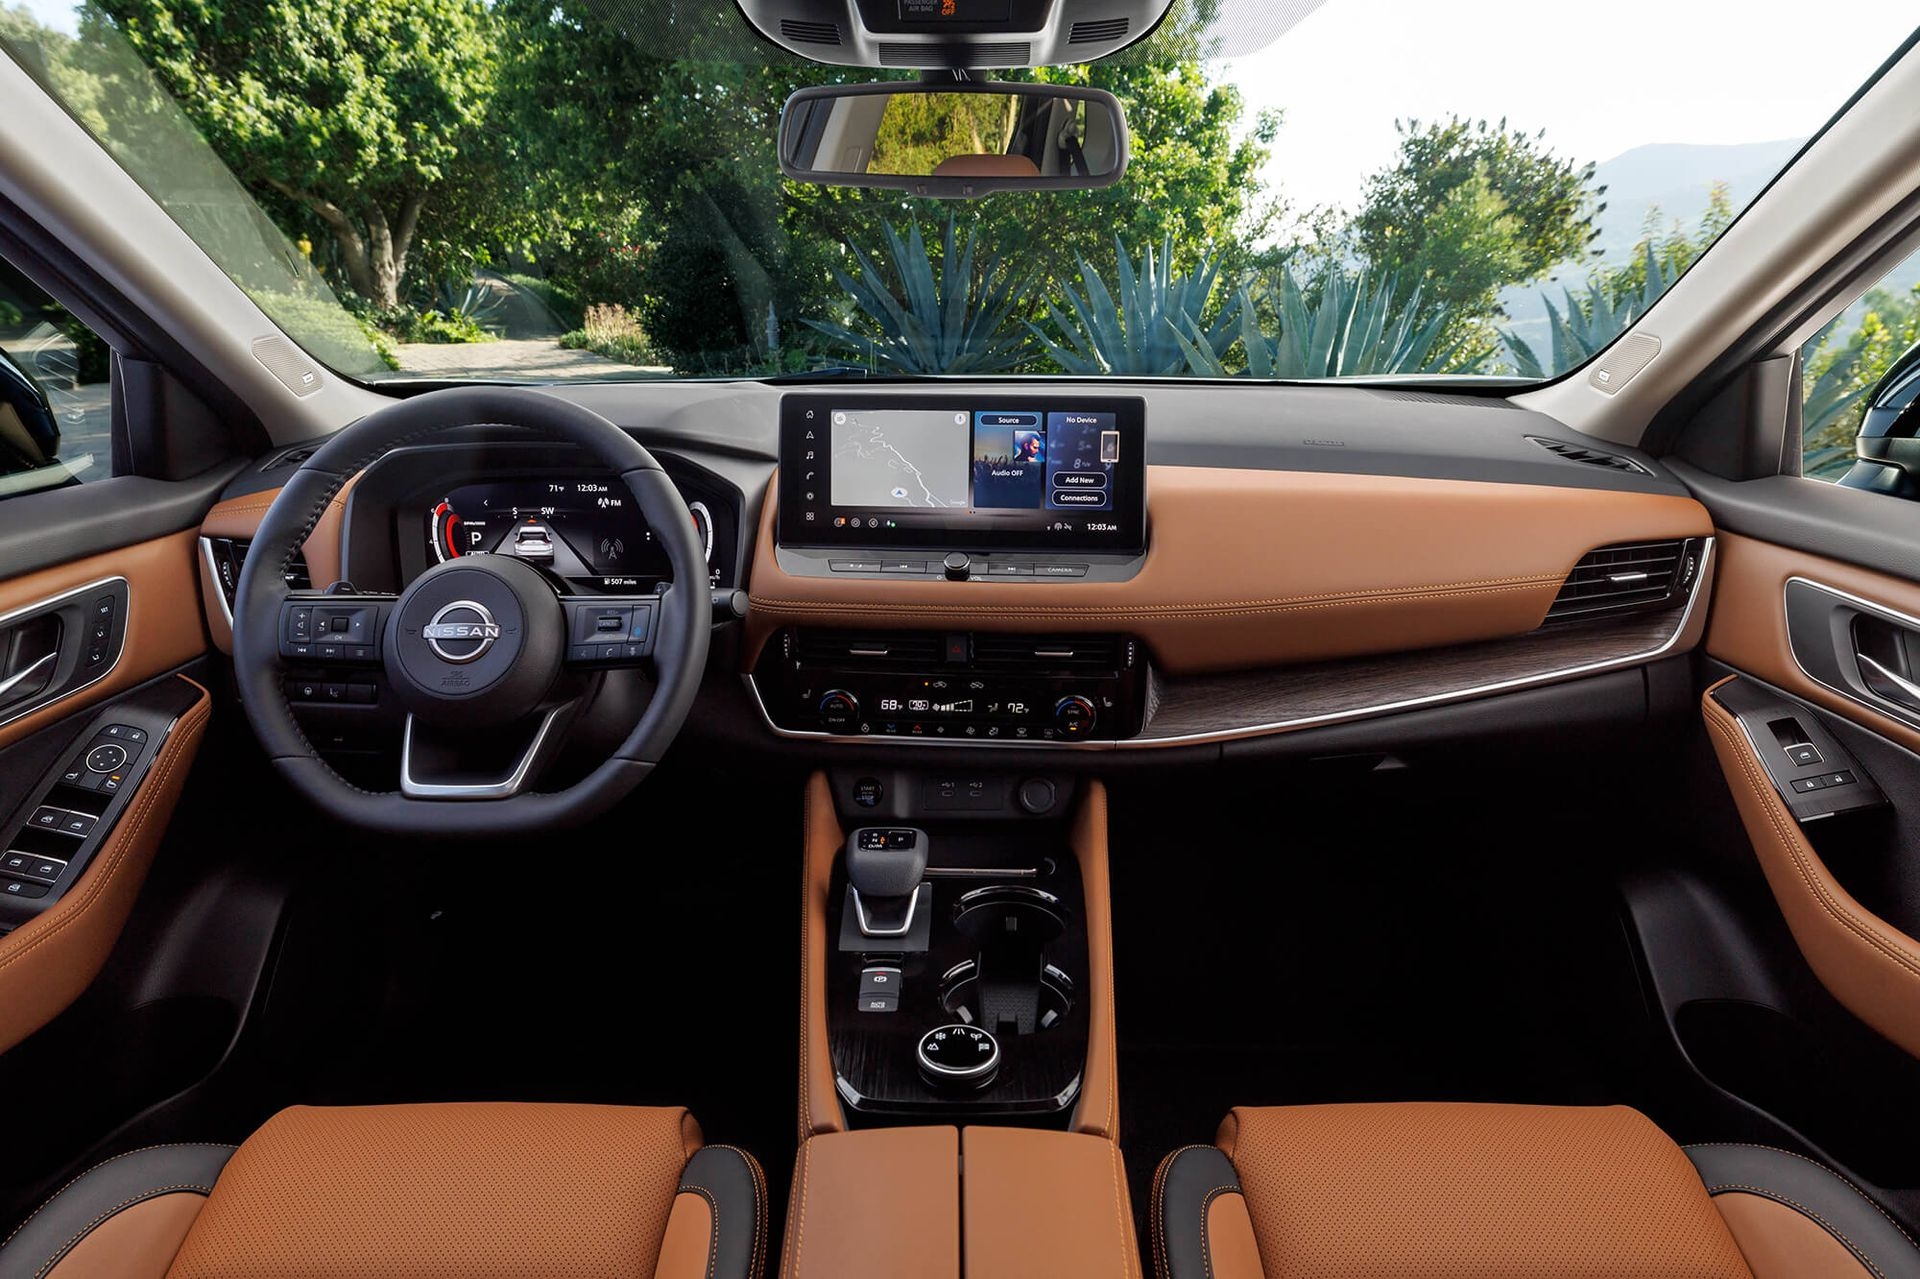 Orange leather interior of the Nissan Rogue